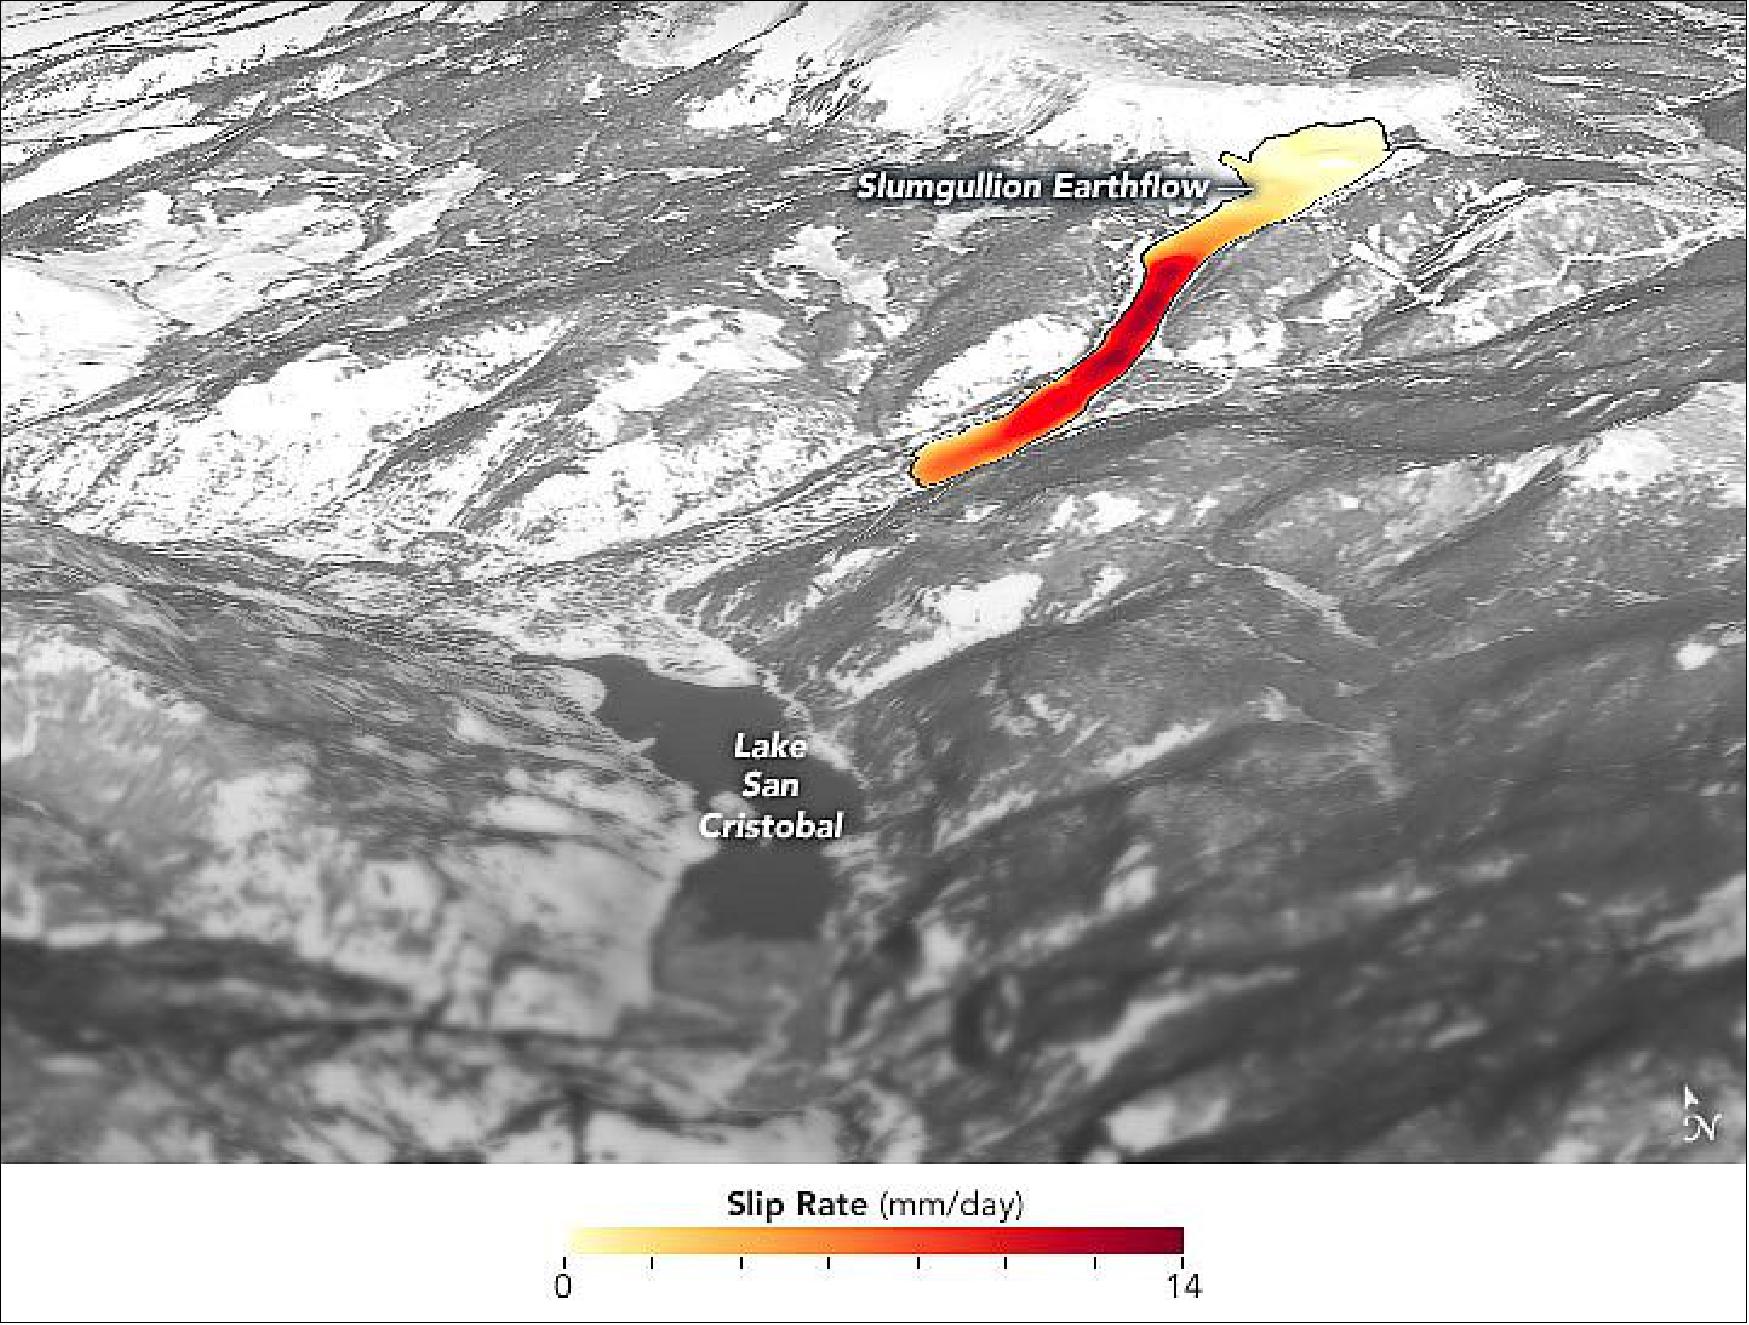 Figure 8: This map shows where and how quickly land is sliding within the Slumgullion landslide (also known as an earthflow). Land depicted in dark red was found to be sliding as much as 14 millimeters (0.55 inches) per day. The map is derived from data collected during multiple research flights from 2011 and 2018 by the Uninhabited Aerial Vehicle Synthetic Aperture Radar (UAVSAR); those data are overlaid on a digital elevation model from the Shuttle Radar Topography Mission (image credit: NASA Earth Observatory images by Joshua Stevens, using data courtesy of Hu, X., et al. (2020) and Landsat data from the U.S. Geological Survey. Photograph by Bill Schulz/USGS. Story by Esprit Smith, NASA’s Earth Science News Team, with Mike Carlowicz)